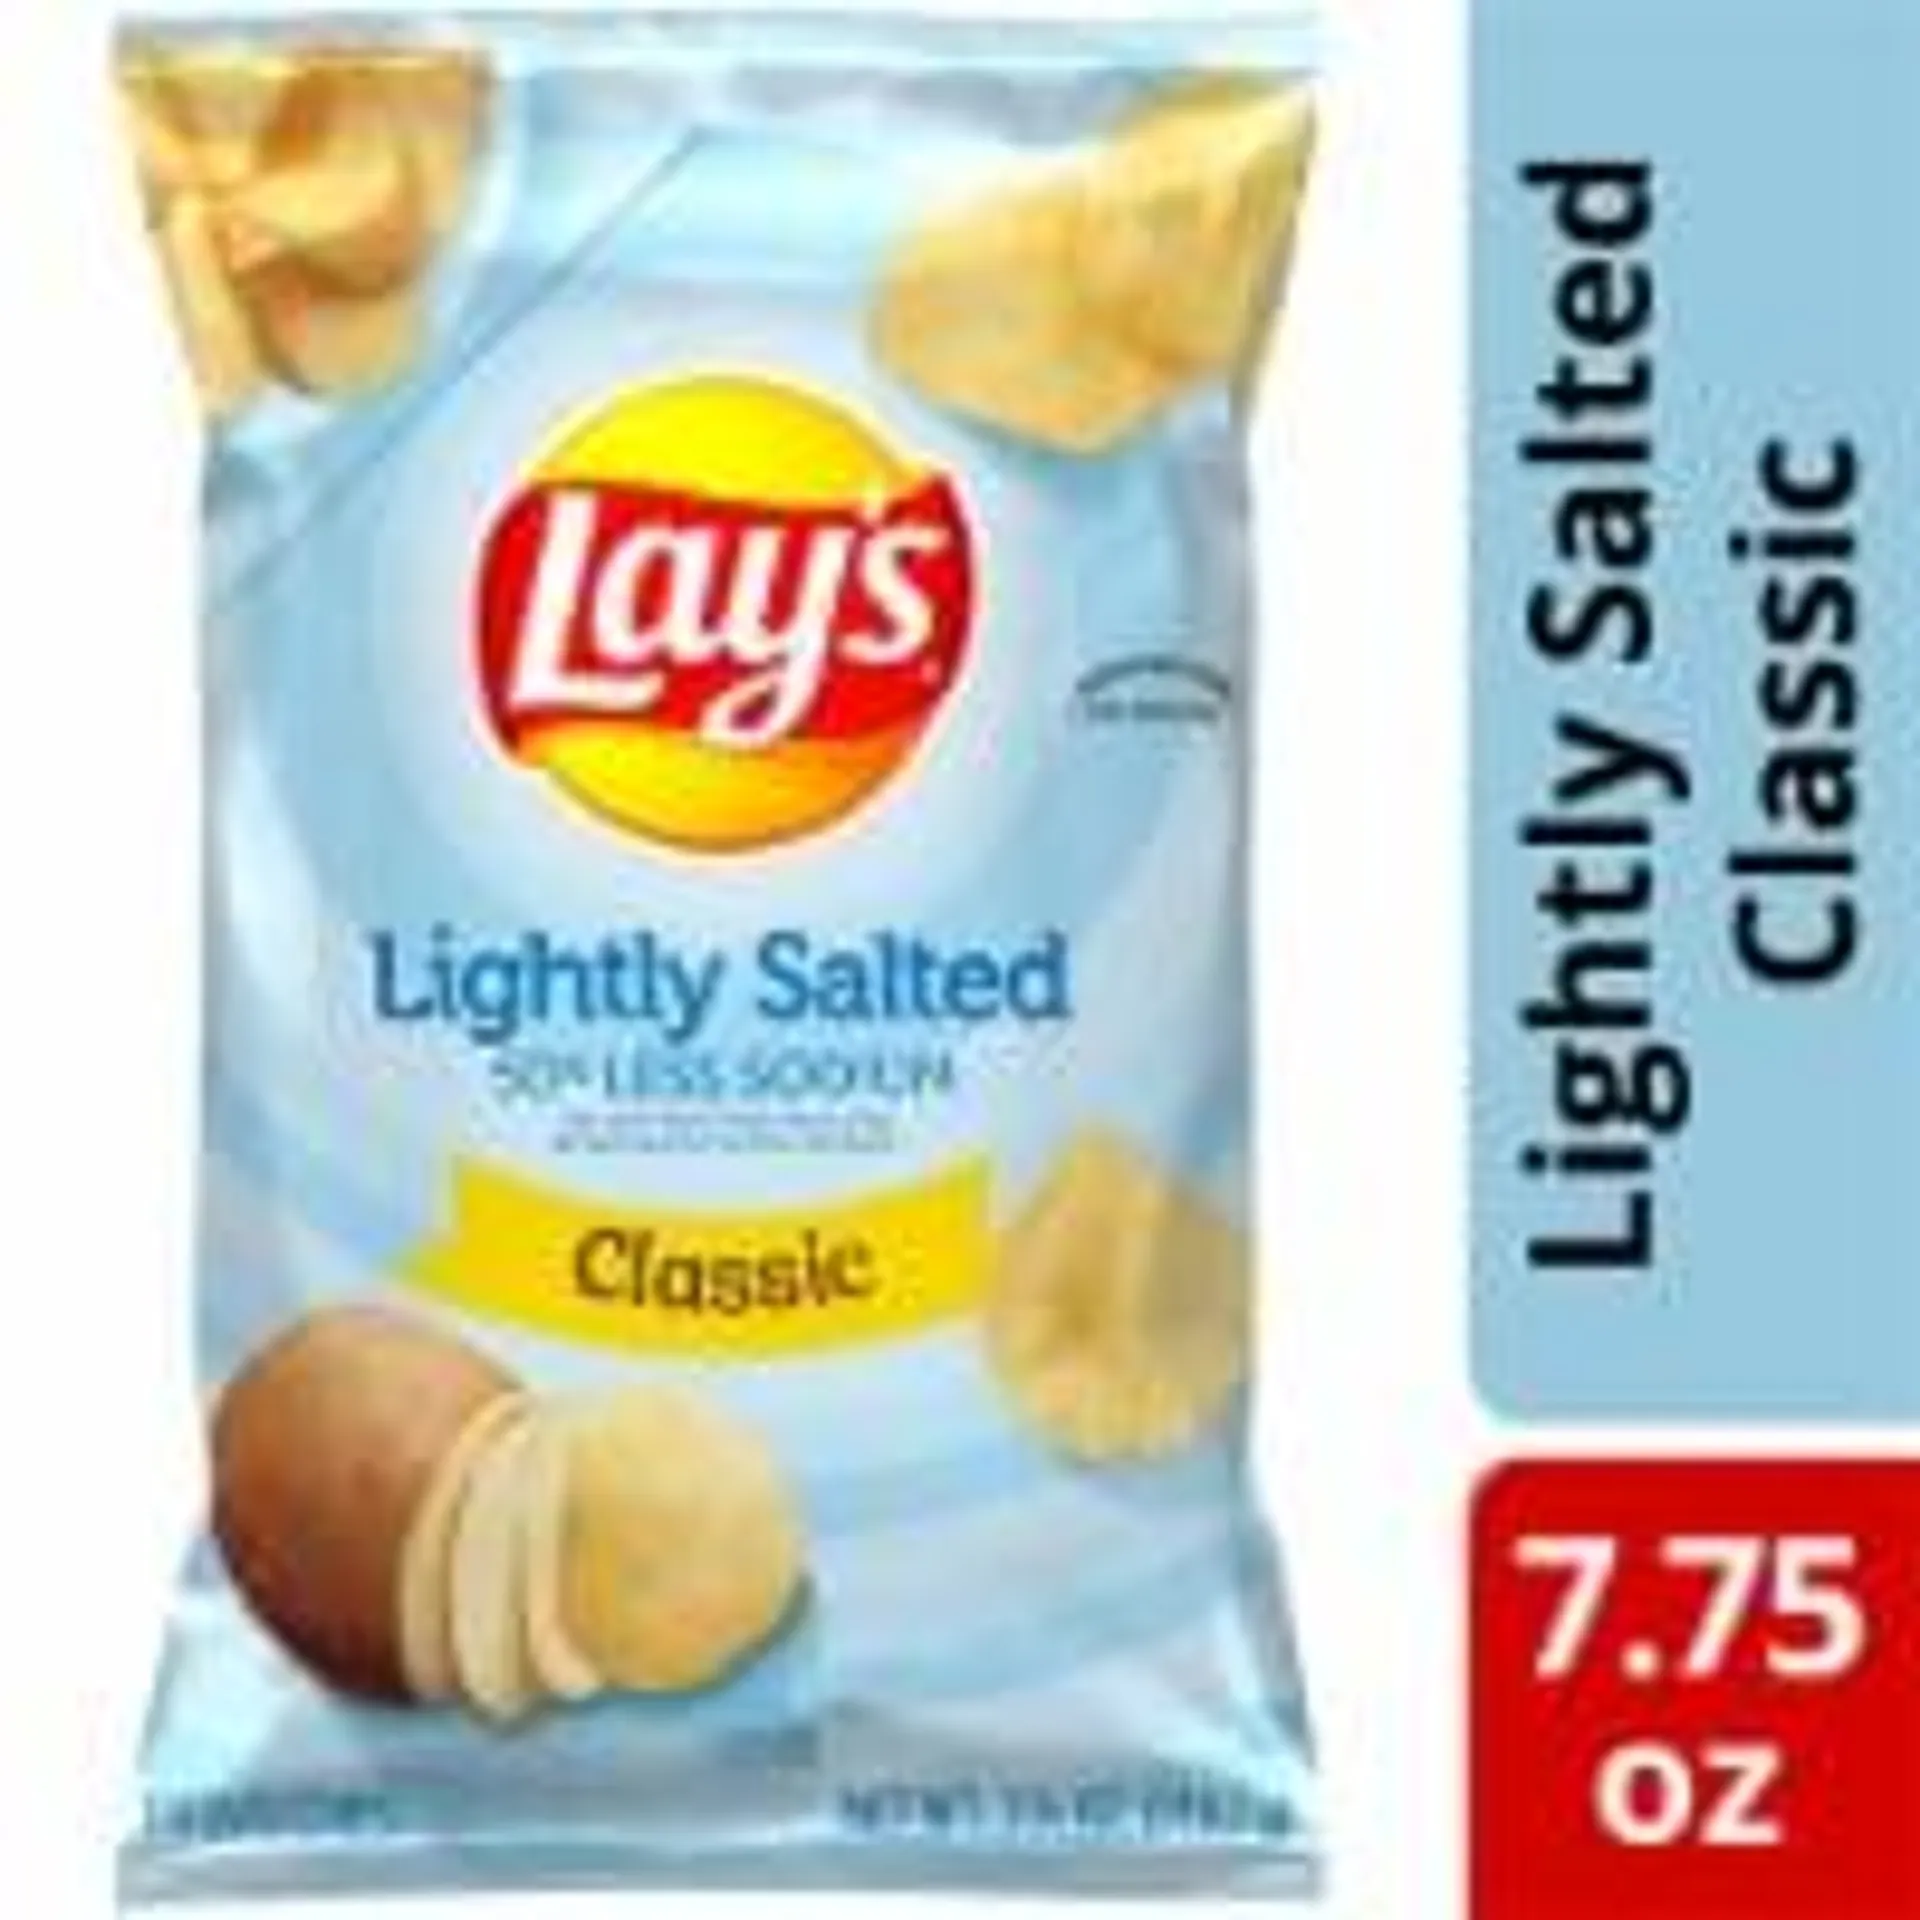 Lay's® Lightly Salted Classic Potato Chips